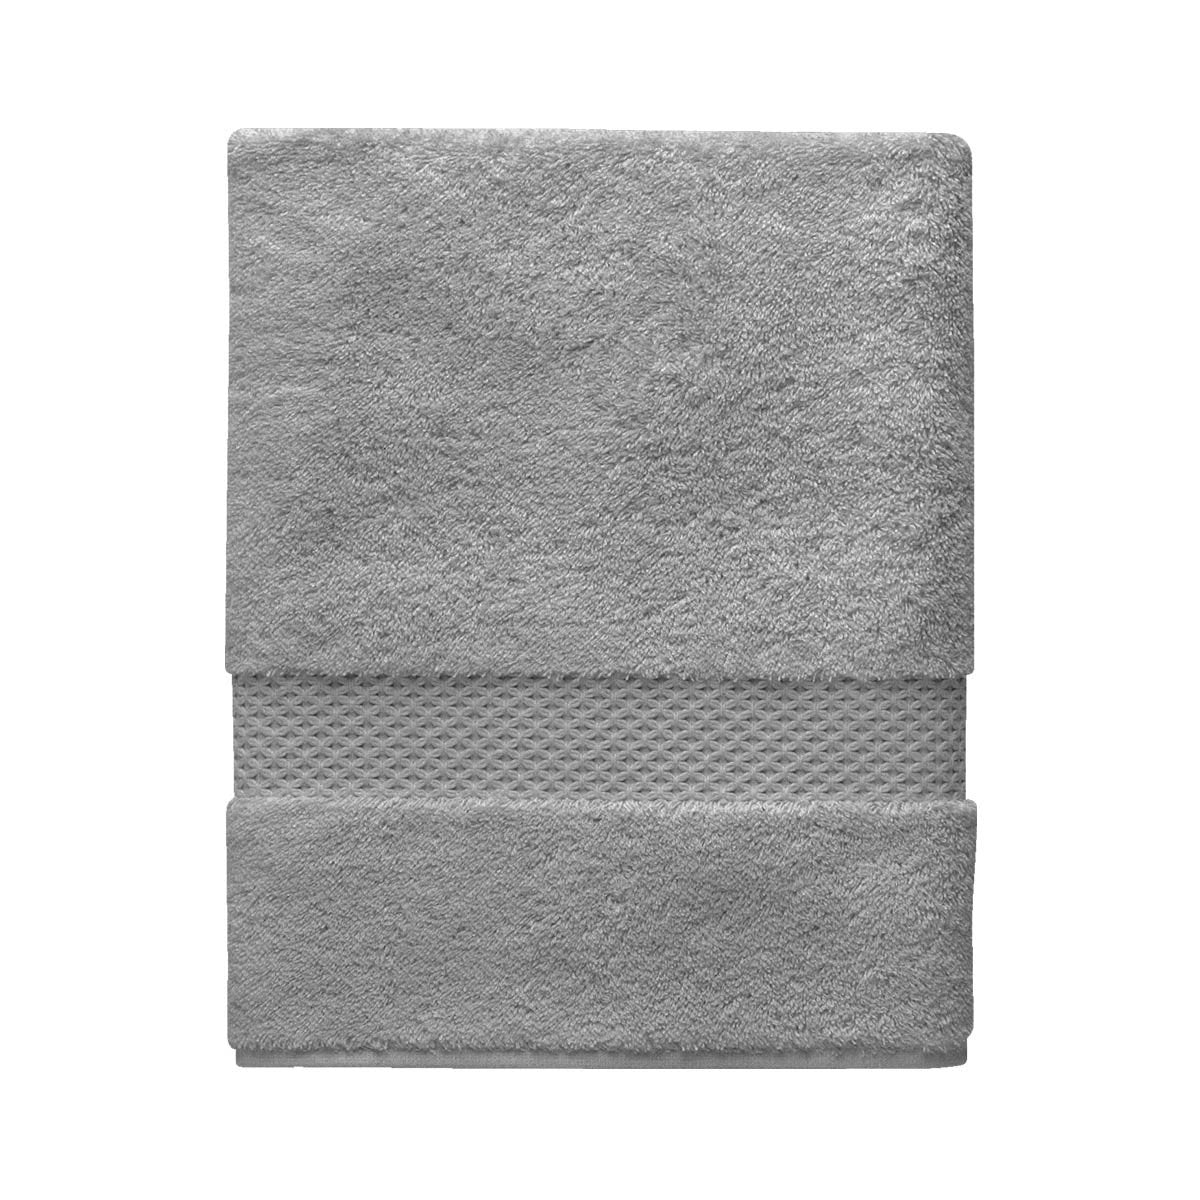 Etoile Platine Bath Collection by Yves Delorme | Fig Linens - Gray bath linen